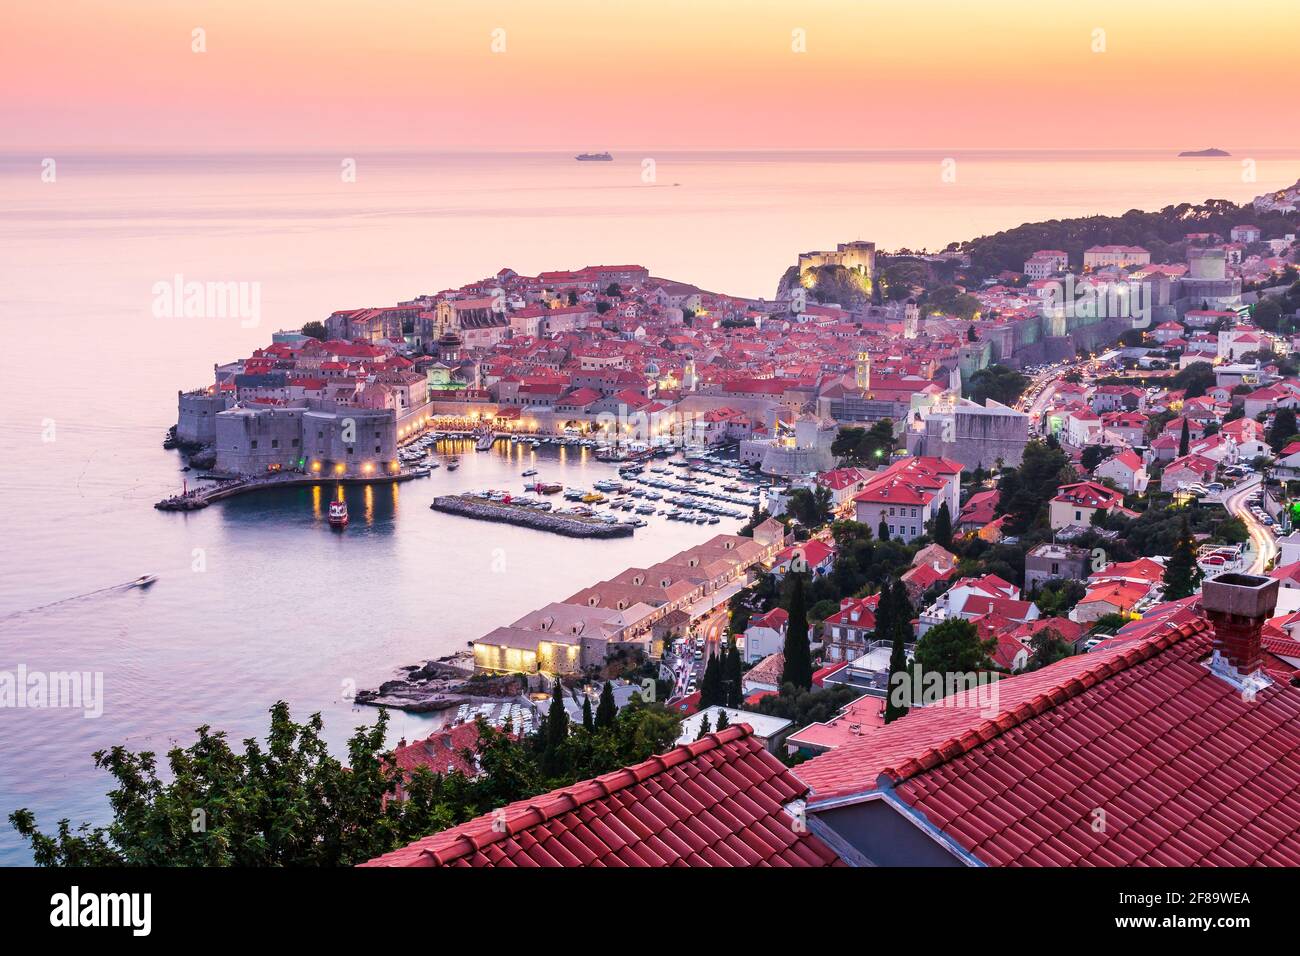 Dubrovnik, Croatia. Panoramic view of the walled city at sunset. Stock Photo